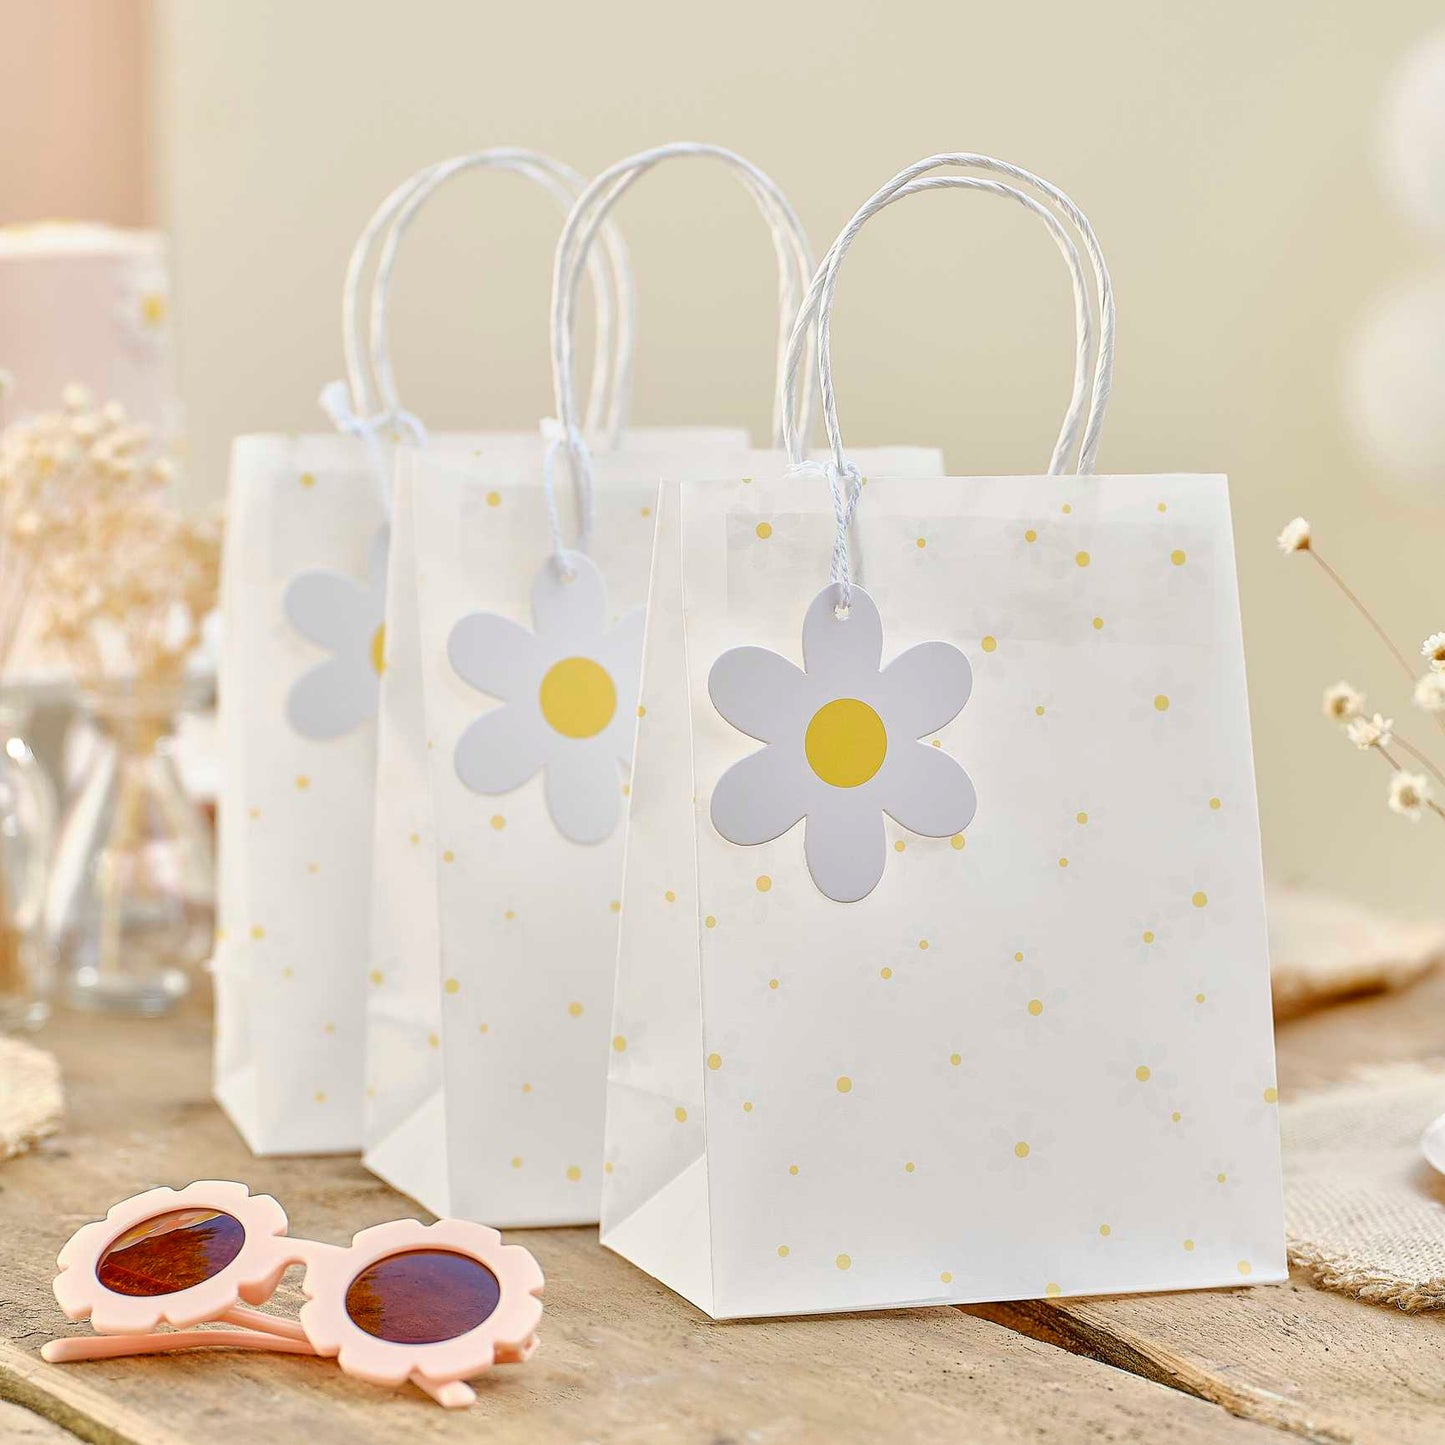 Daisy Print Vellum Party Bags - Set of 5